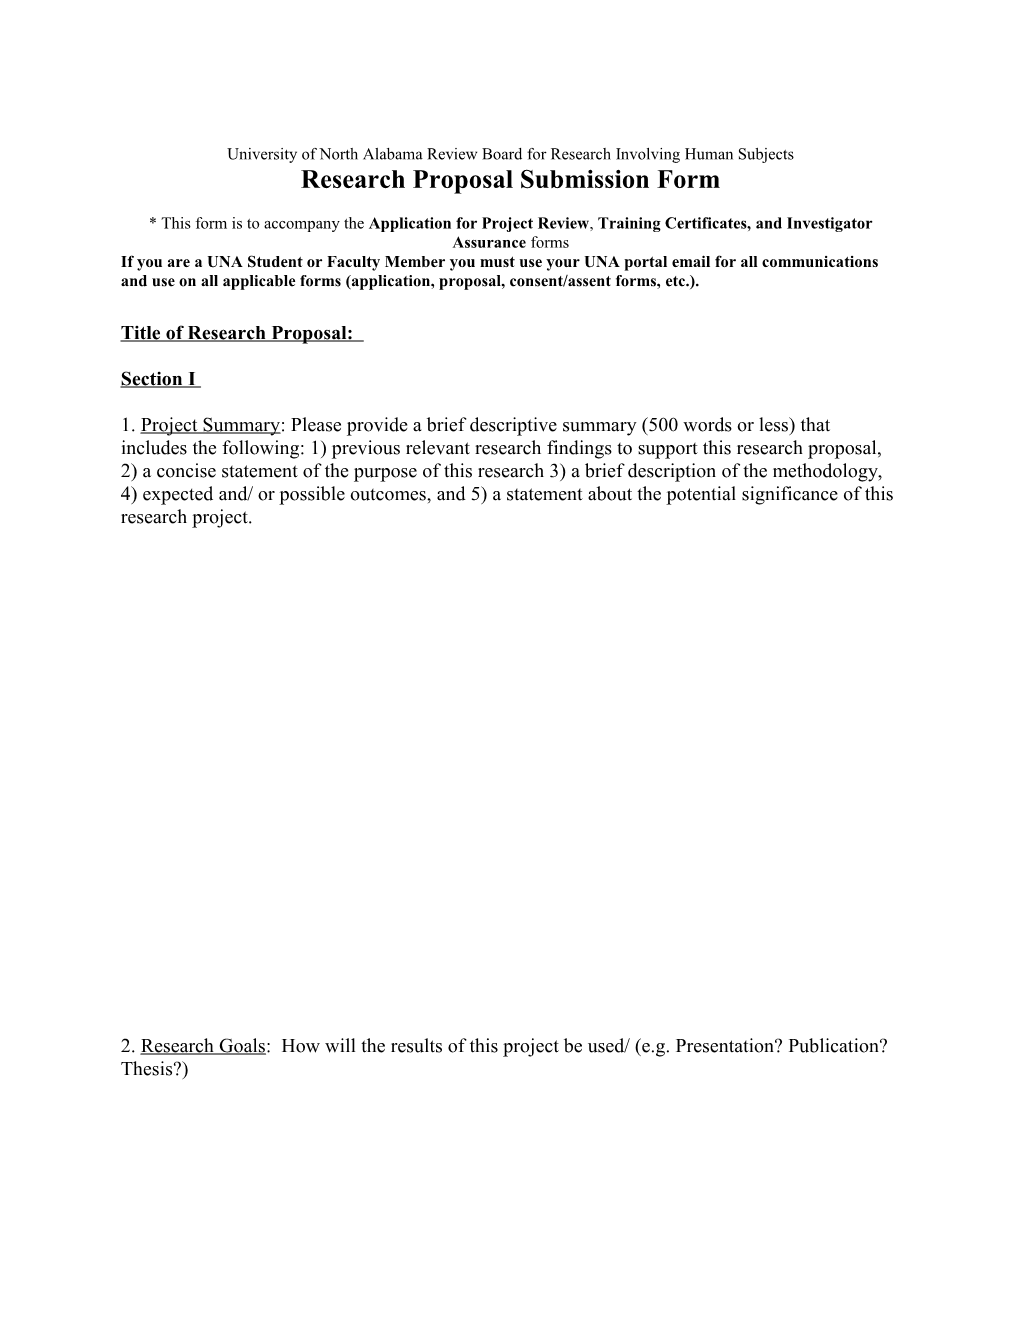 University of Northalabama Review Board for Research Involving Human Subjects